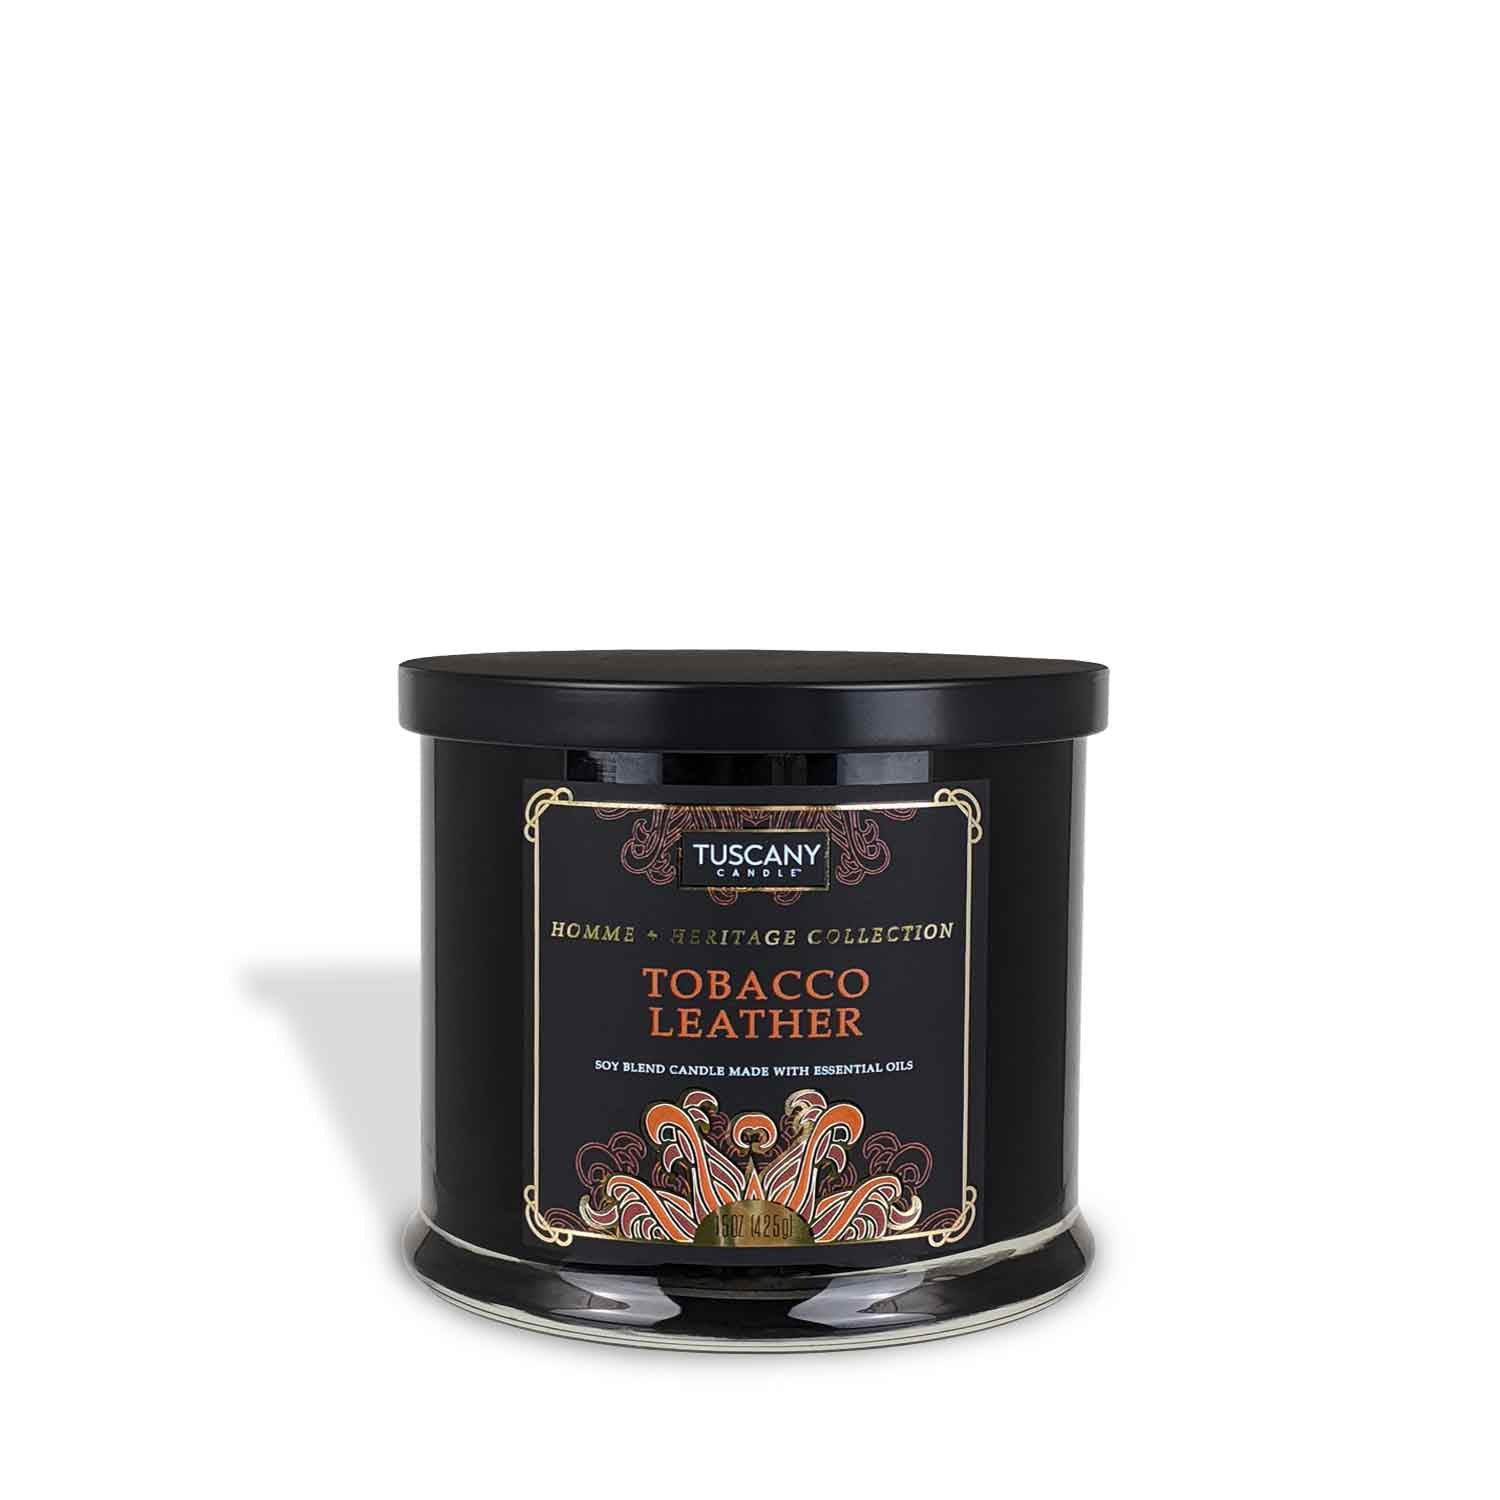 A vintage Tuscany Candle Tobacco Leather Scented Jar Candle (15 oz) – Homme + Heritage Collection tin.